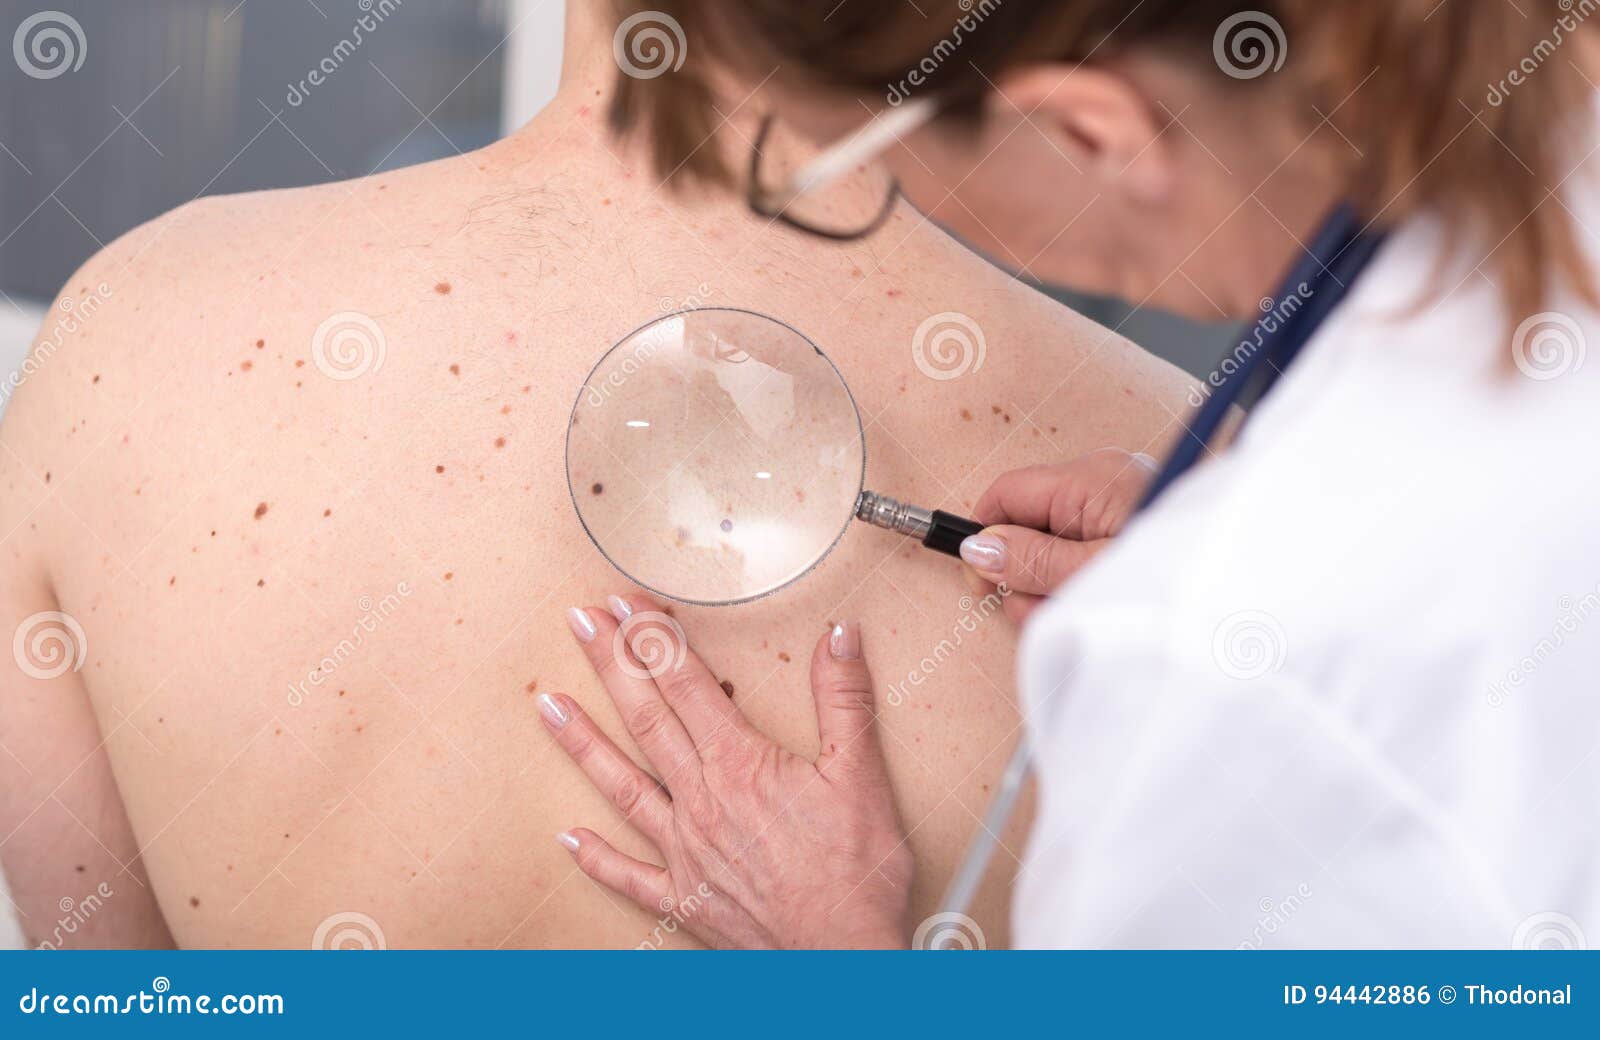 dermatologist examining the skin of a patient